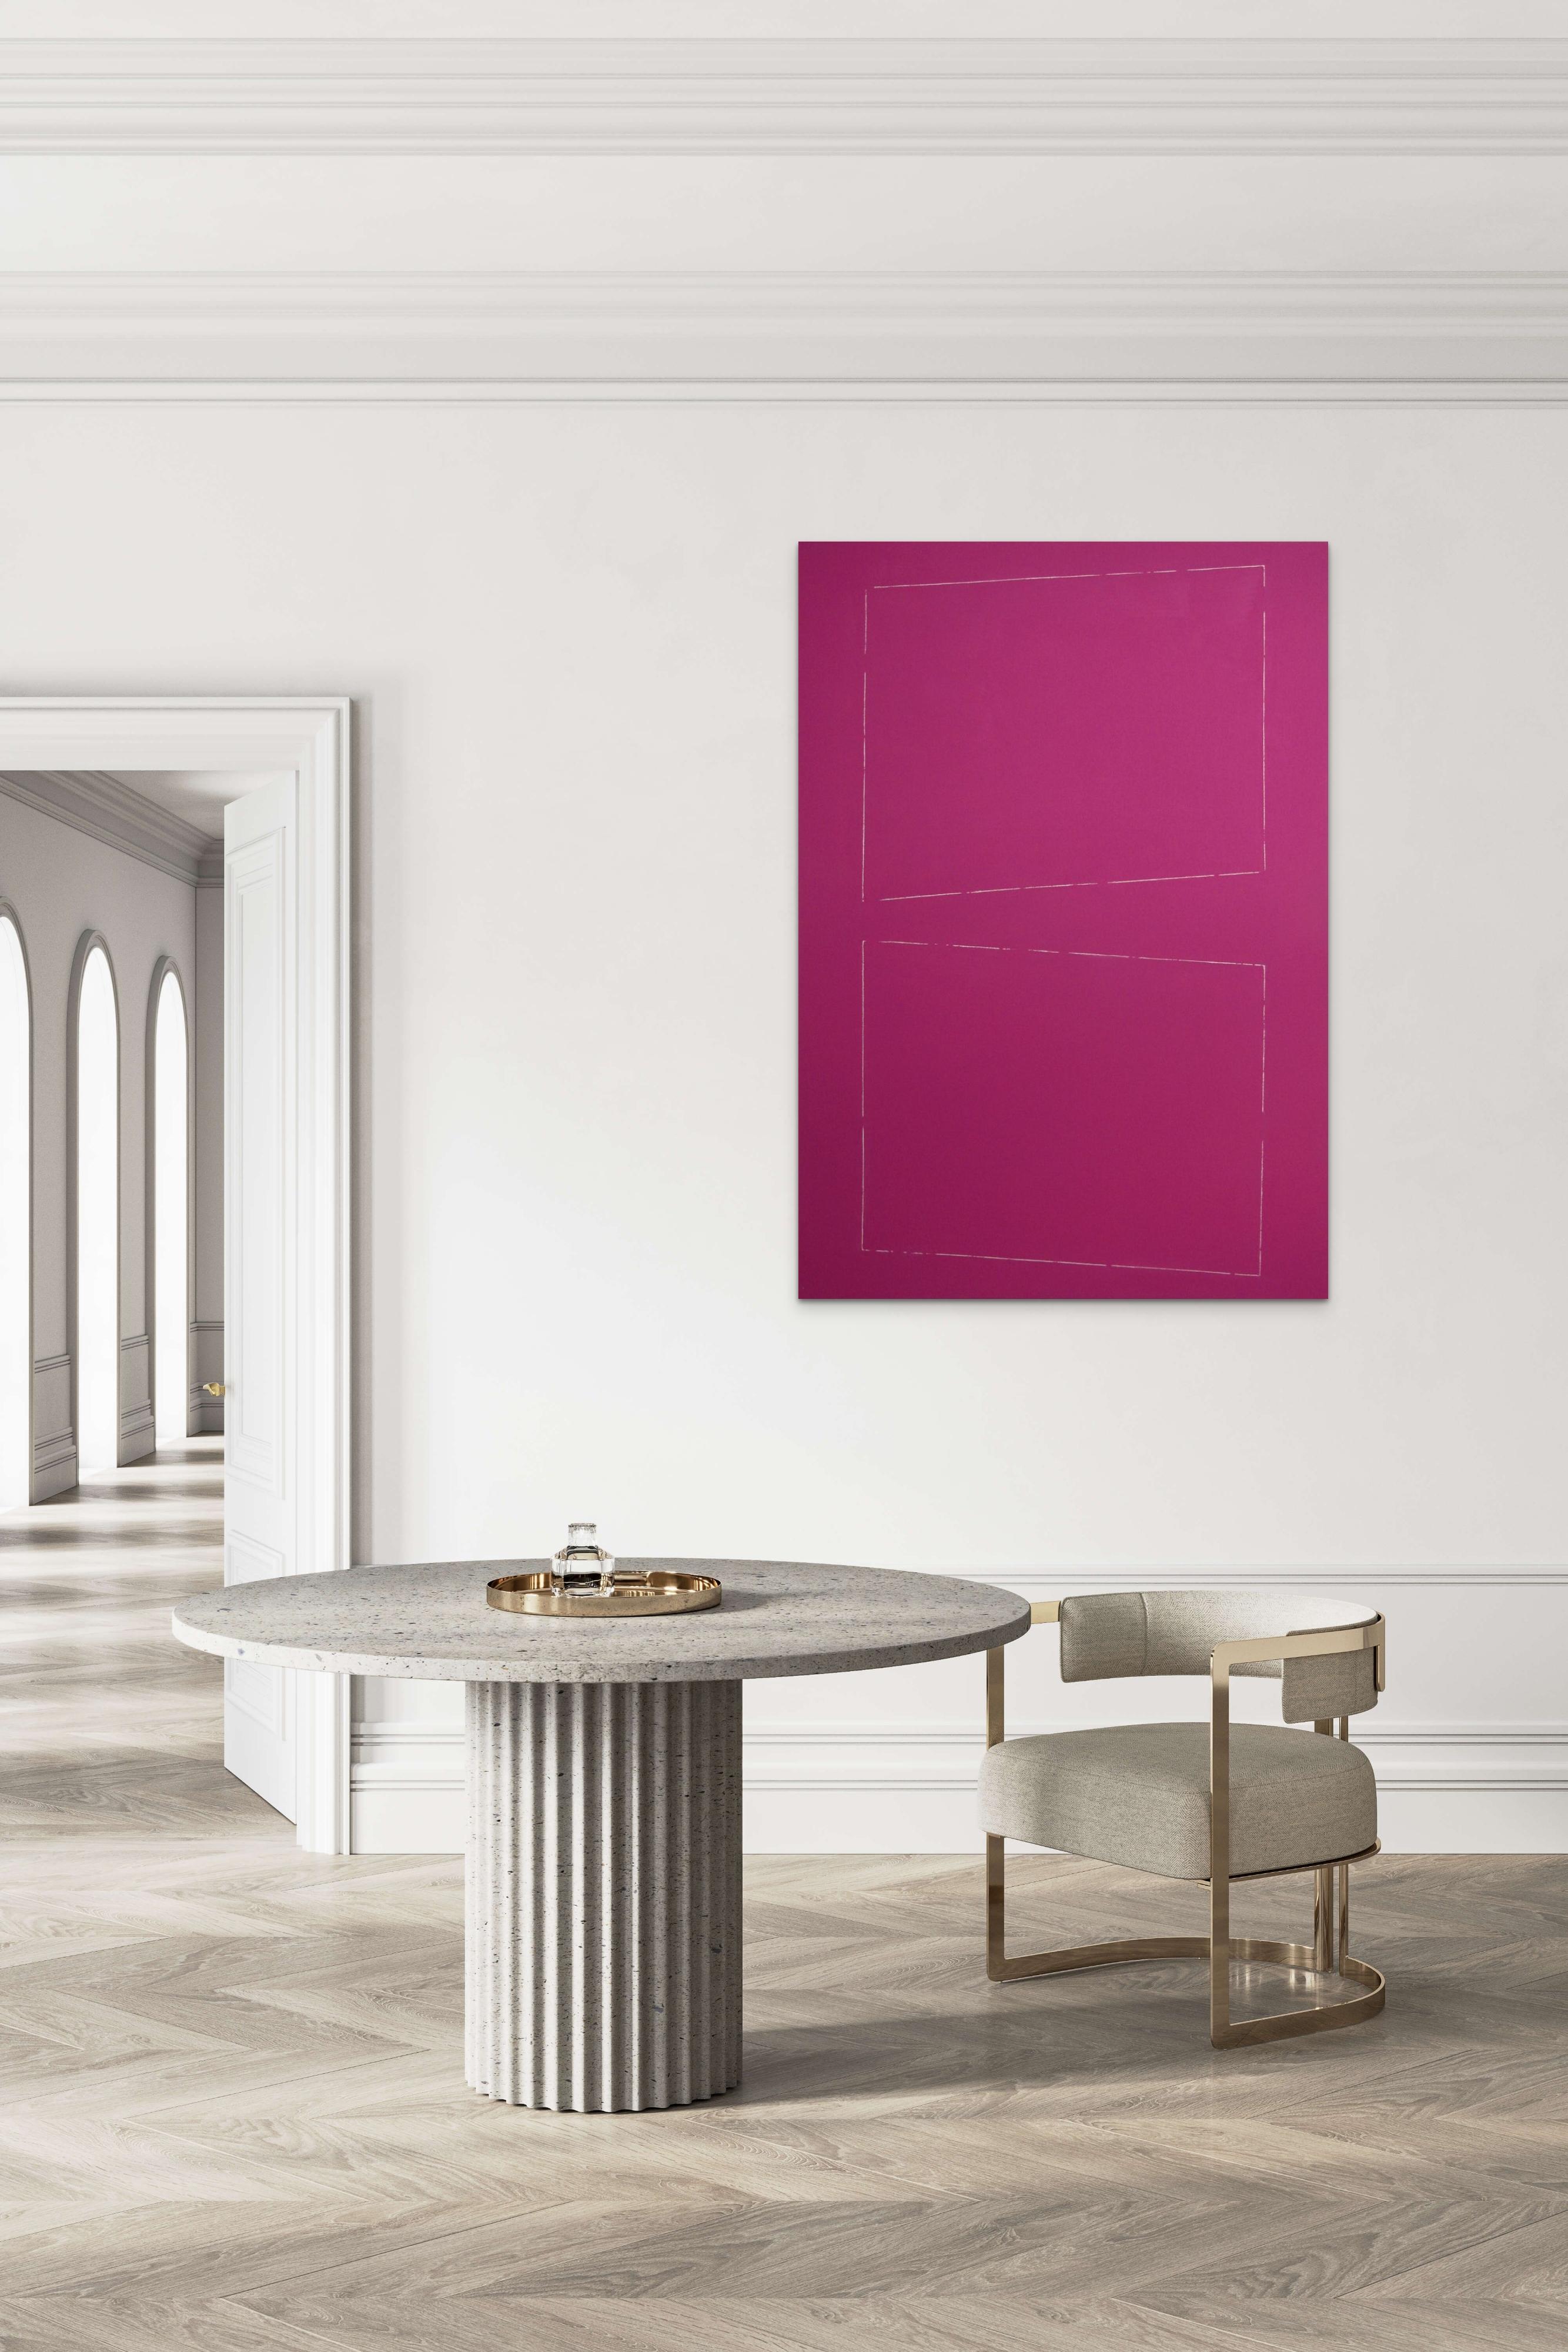 Mono Rose - Serie Juillet 01 (Abstract painting) - Painting by Guillaume Moschini